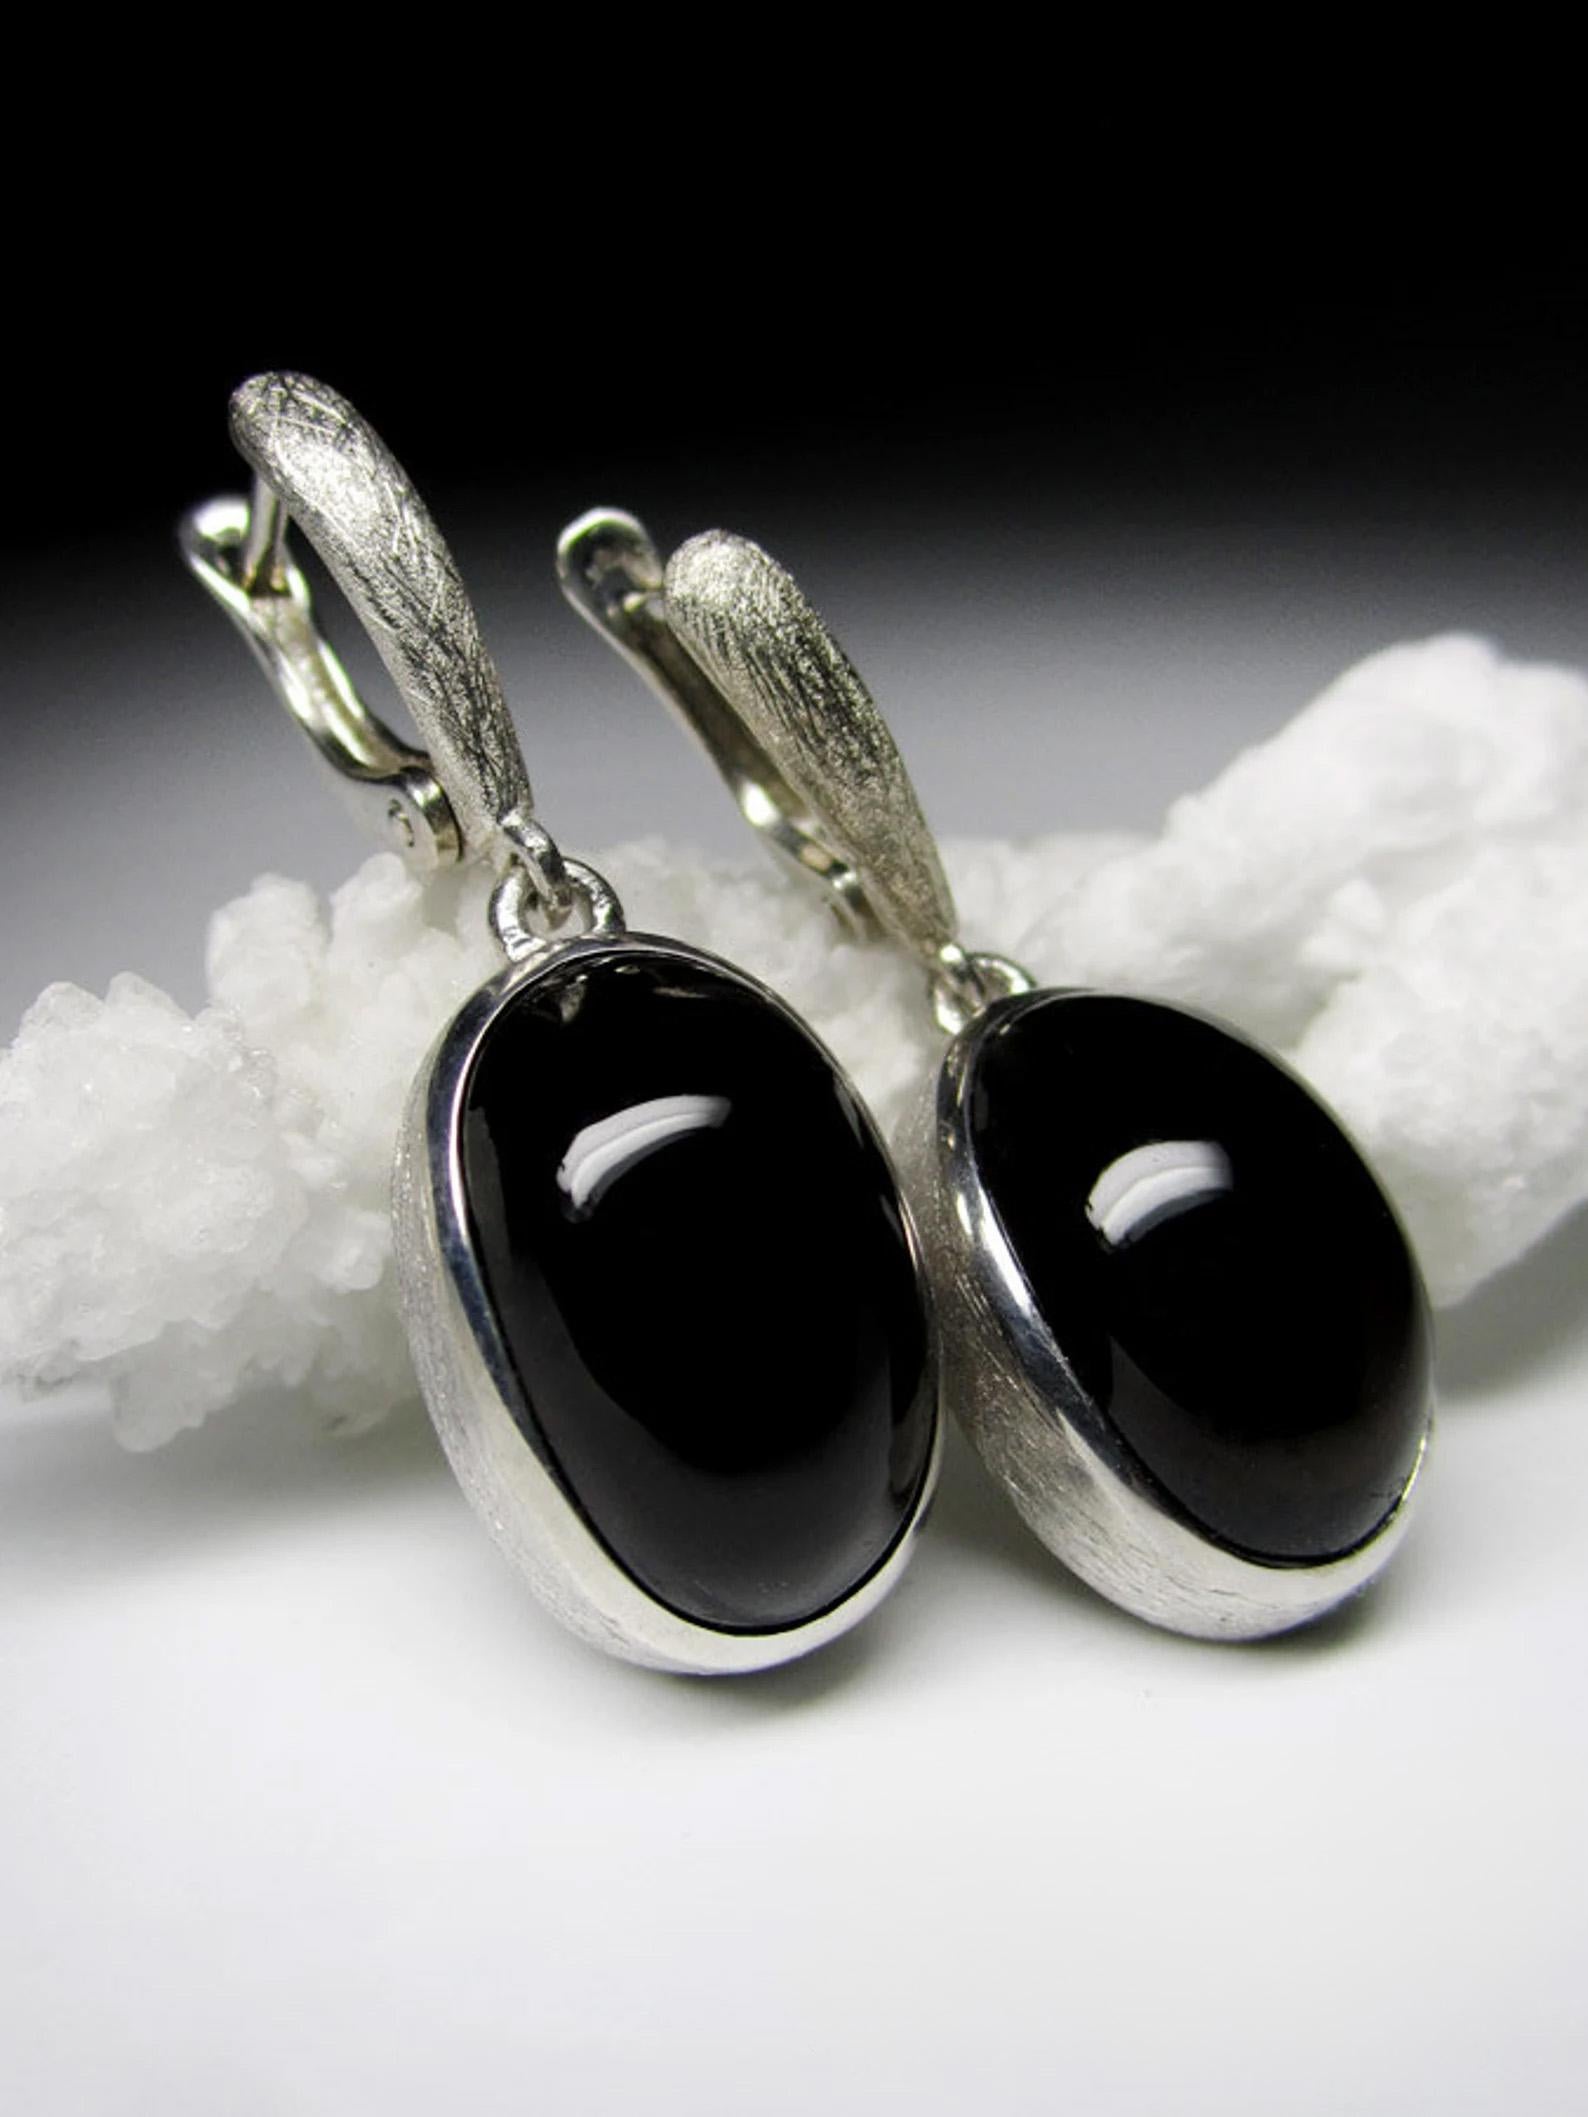 Morion Quartz Scratched Silver Earrings Cabochon Oval Onyx Black Color Gemstone  For Sale 1